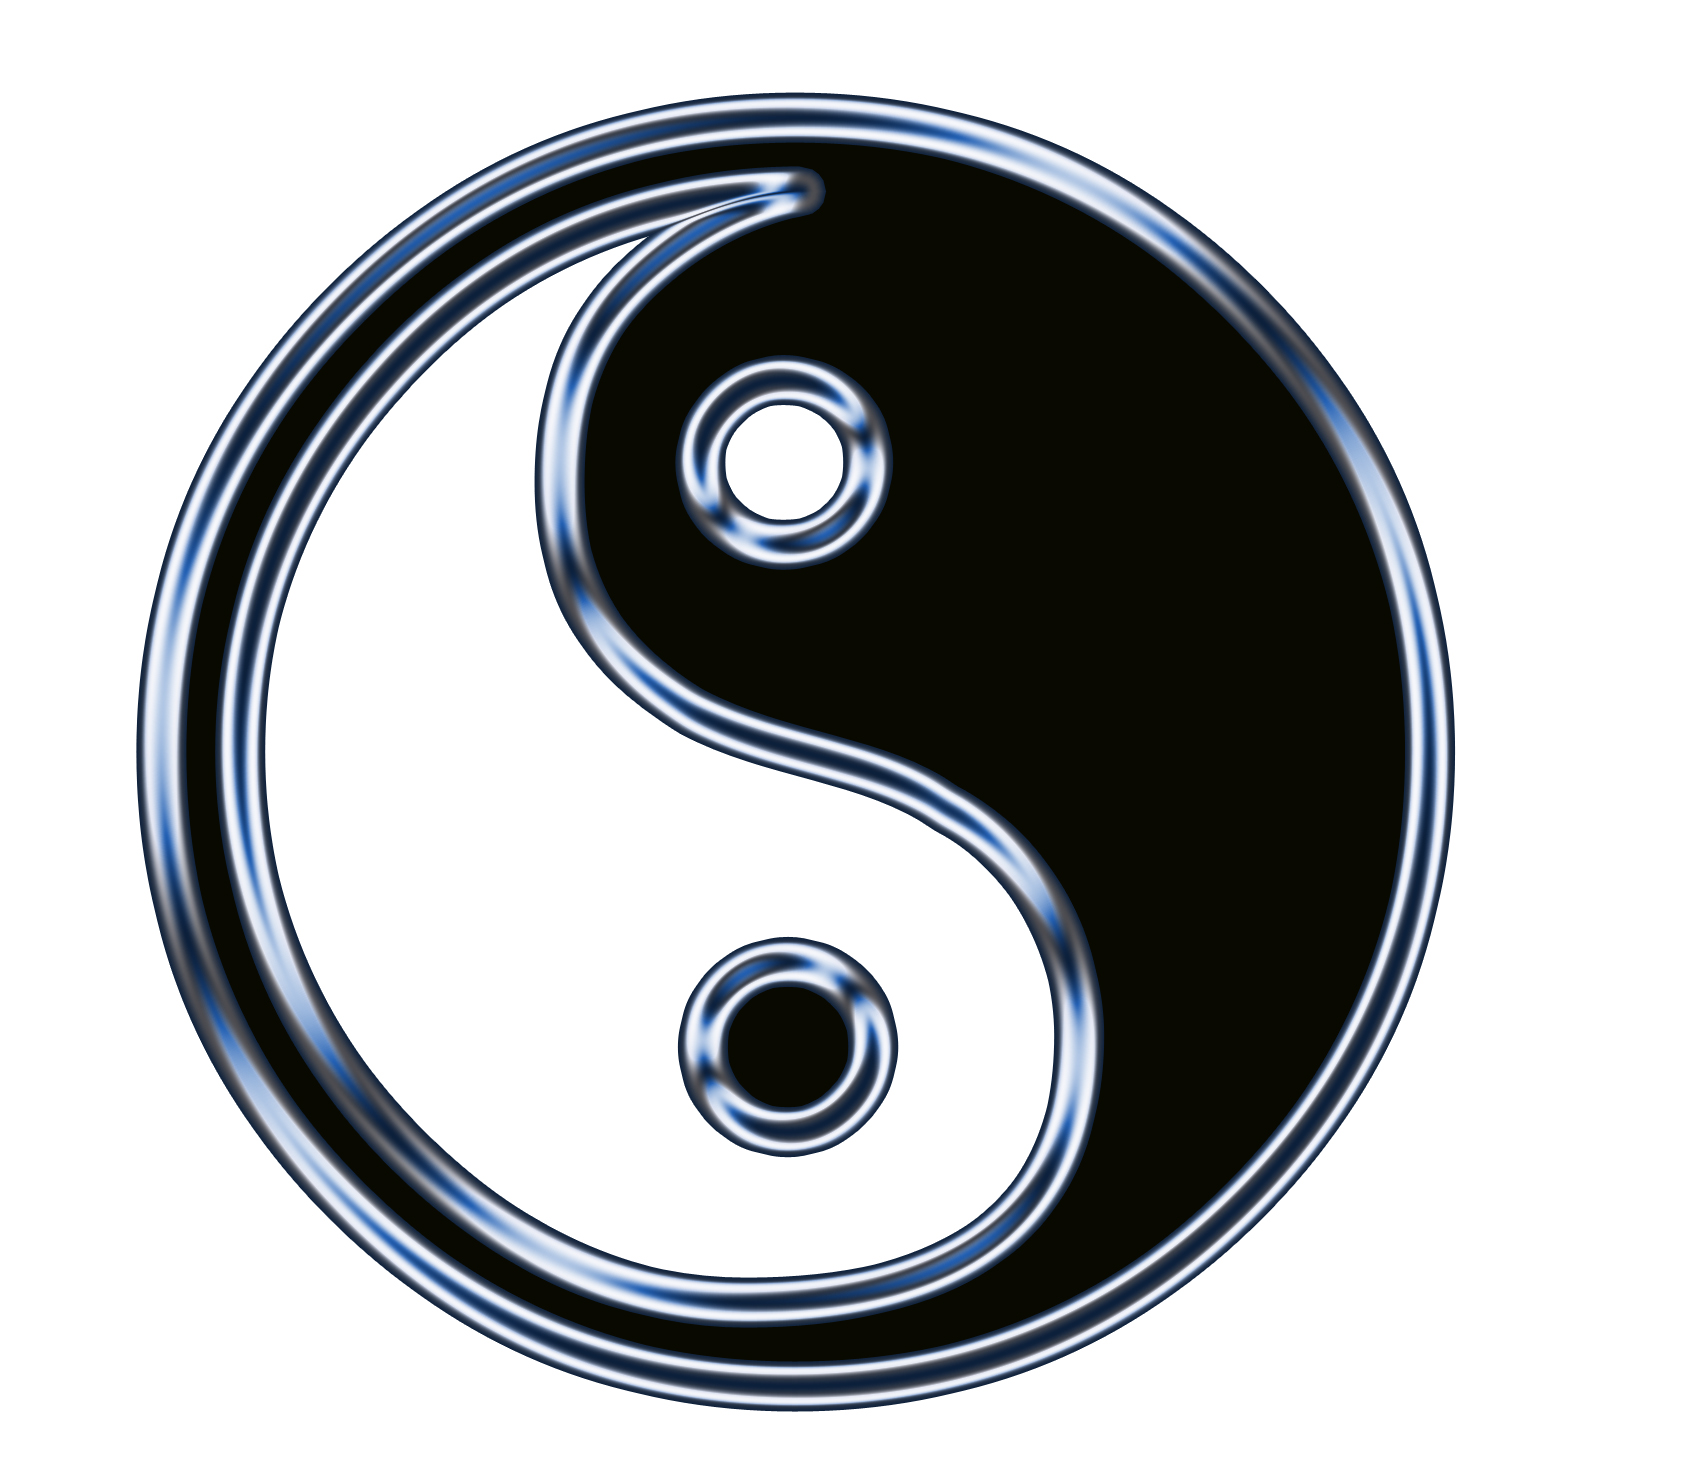 Imperfect Spirituality | Yin/Yang approach can help curb food cravings